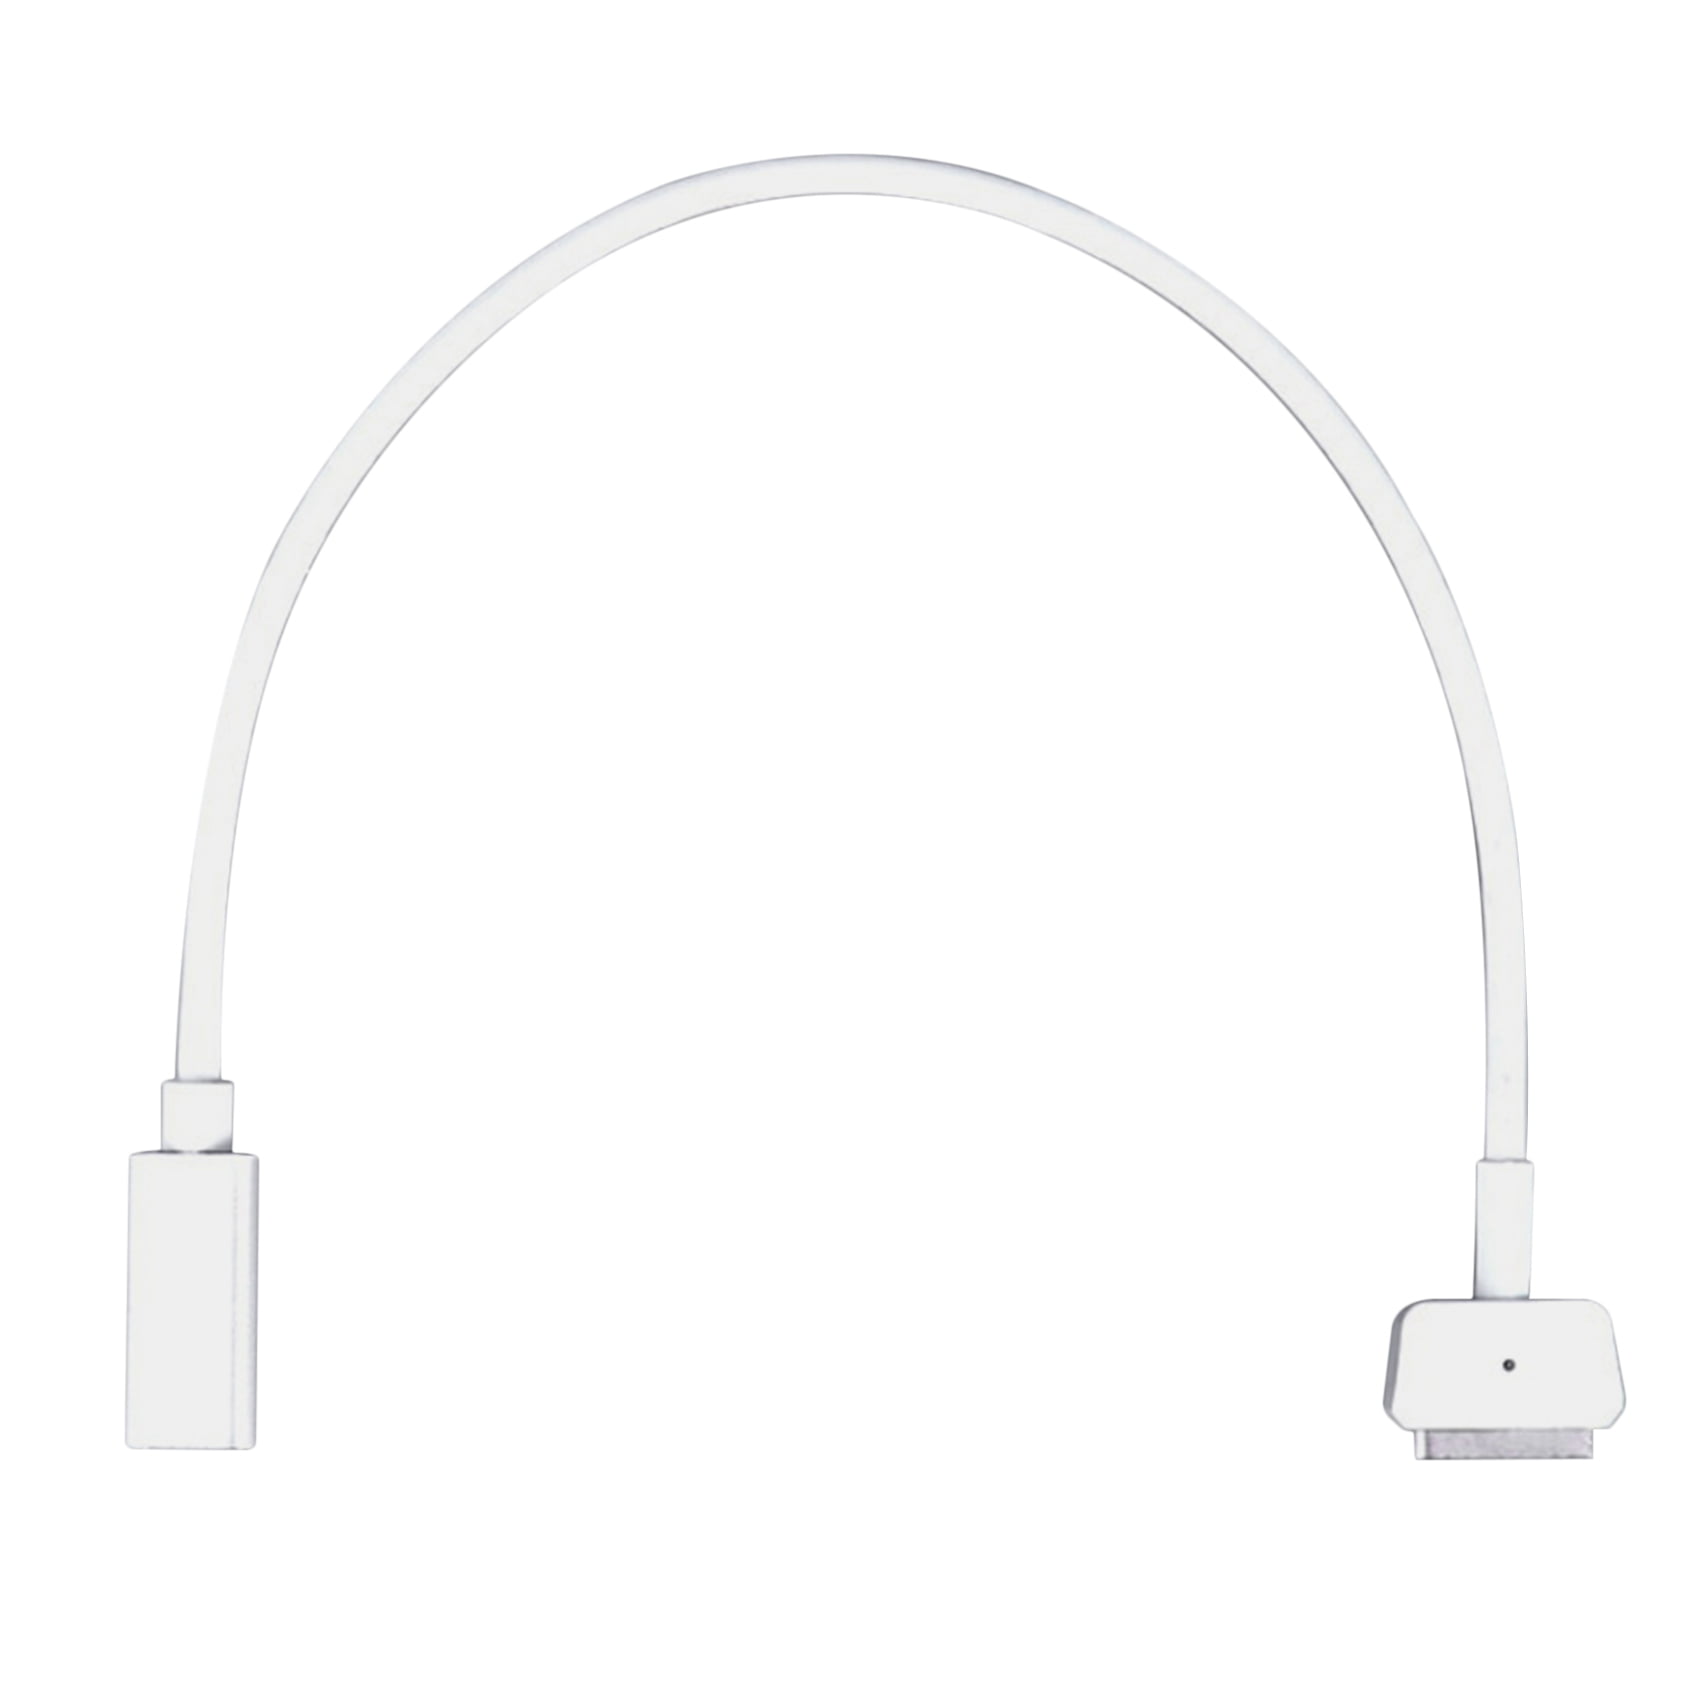 mestre Let at ske Eftermæle Type C Female to for Magsafe 2 Cable Adapter,for MacBook Air / Pro 45W 60W  - Walmart.com